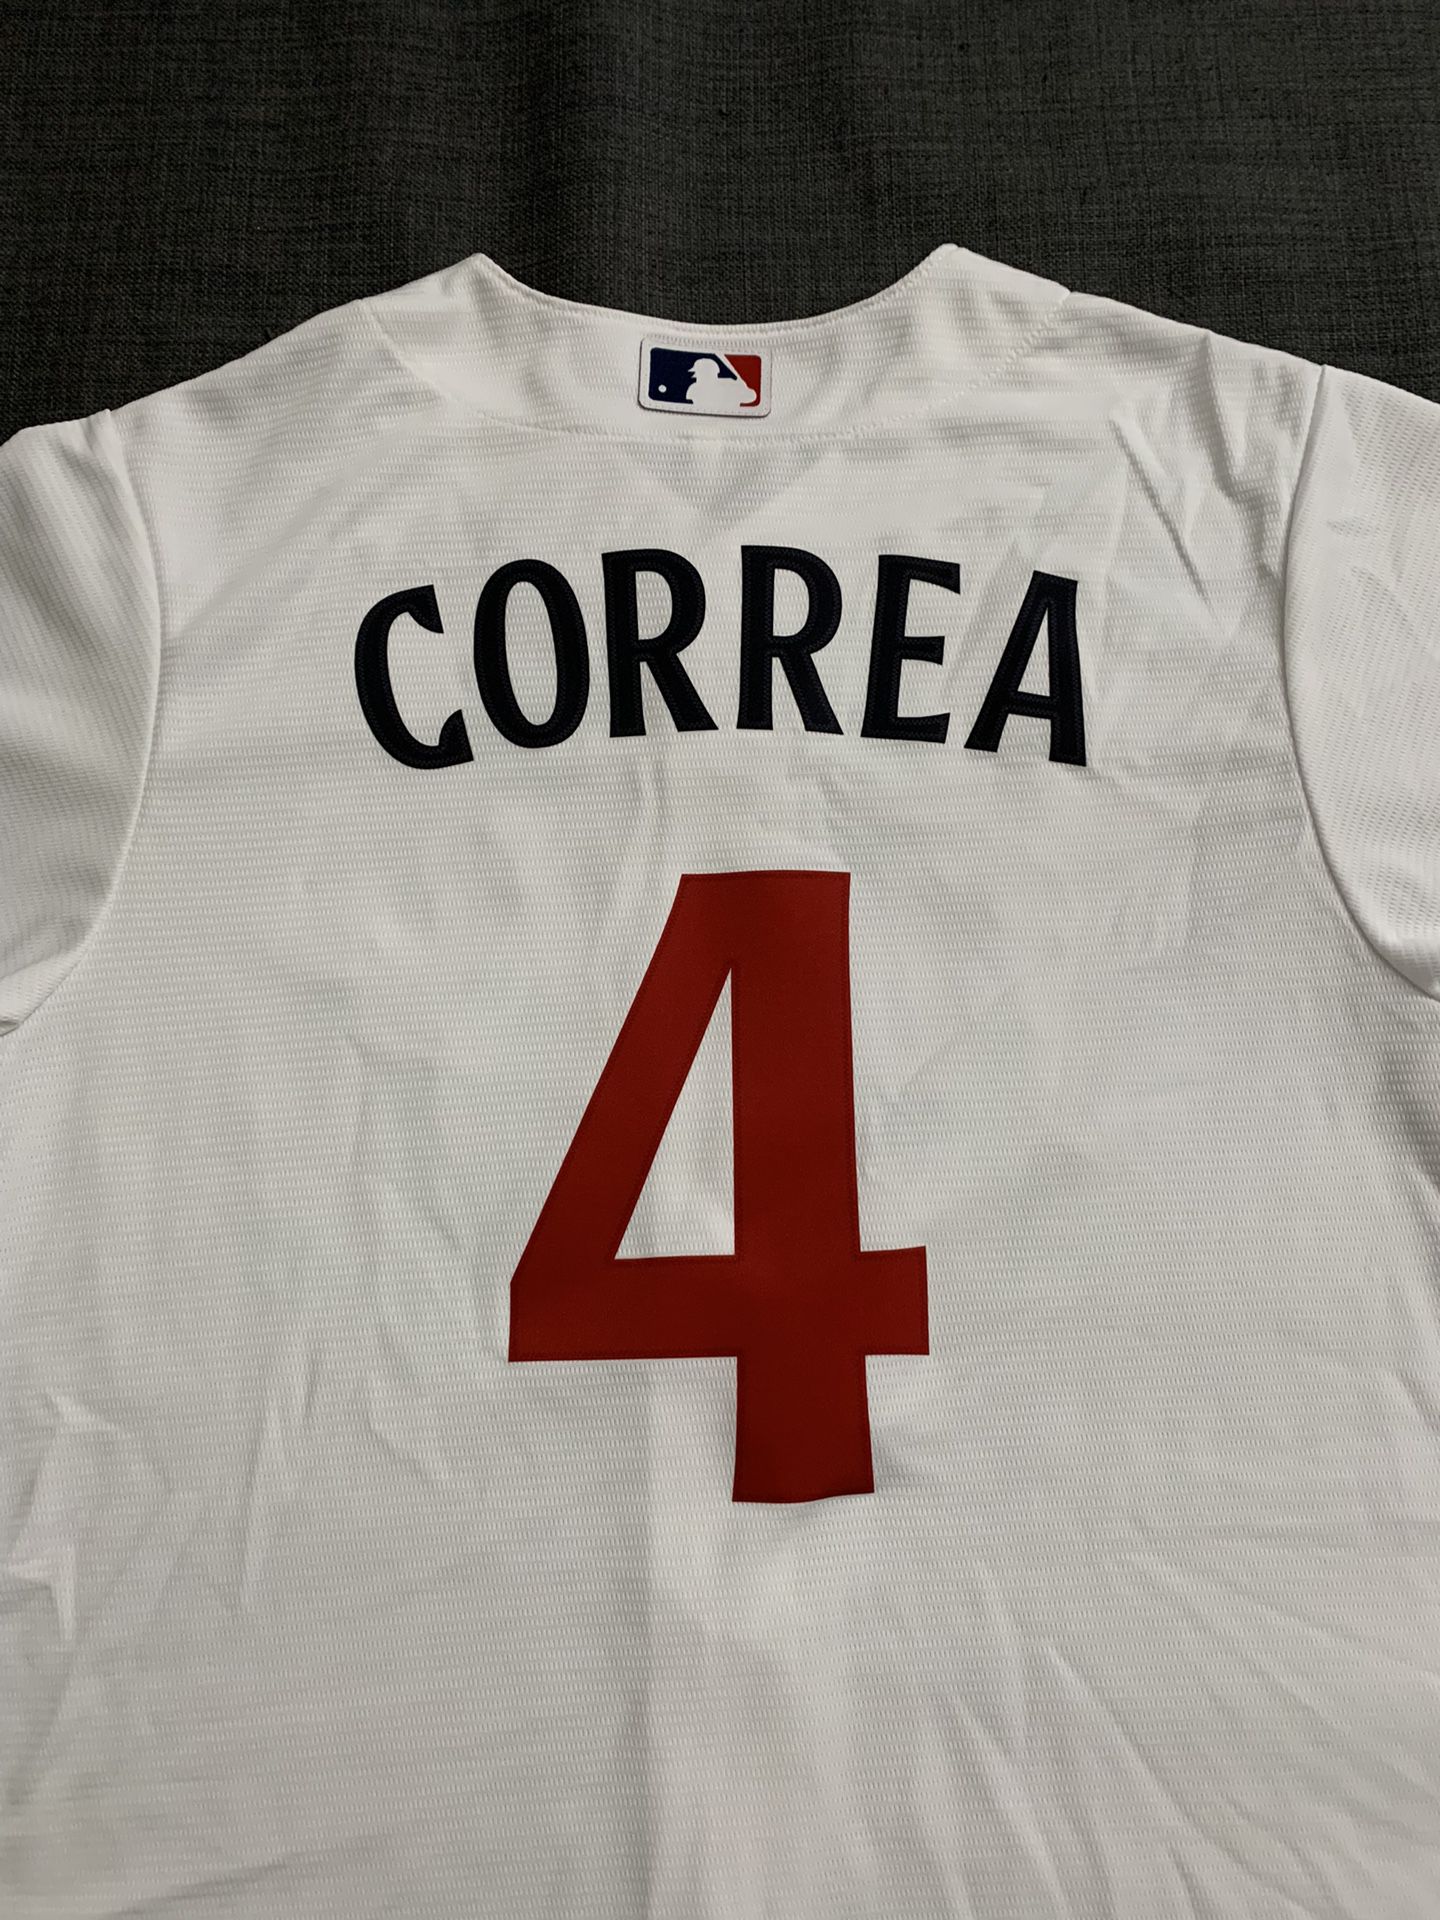 NIKE Carlos Correa Minnesota Twins Authentic MLB Jersey #4 White (Men’s -  Small) for Sale in Las Vegas, NV - OfferUp